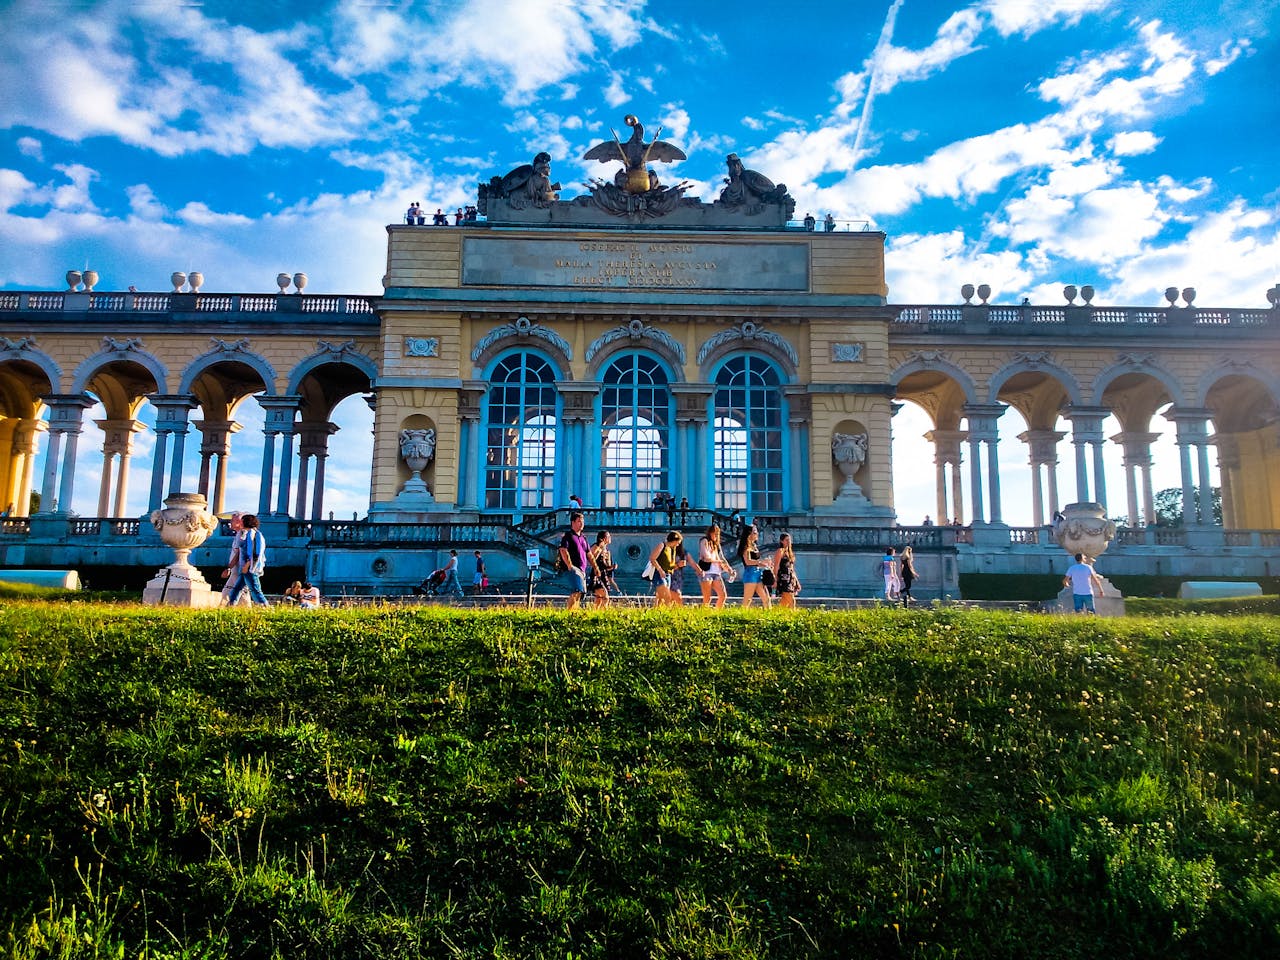 <p><strong>International tourist arrivals:</strong> 26.2 million</p>  <p>Austria is known for its rich culture, especially its art and music scene. The Cultural World Heritage Site of Schönbrunn Palace is Austria's most frequently visited tourist attraction.</p>